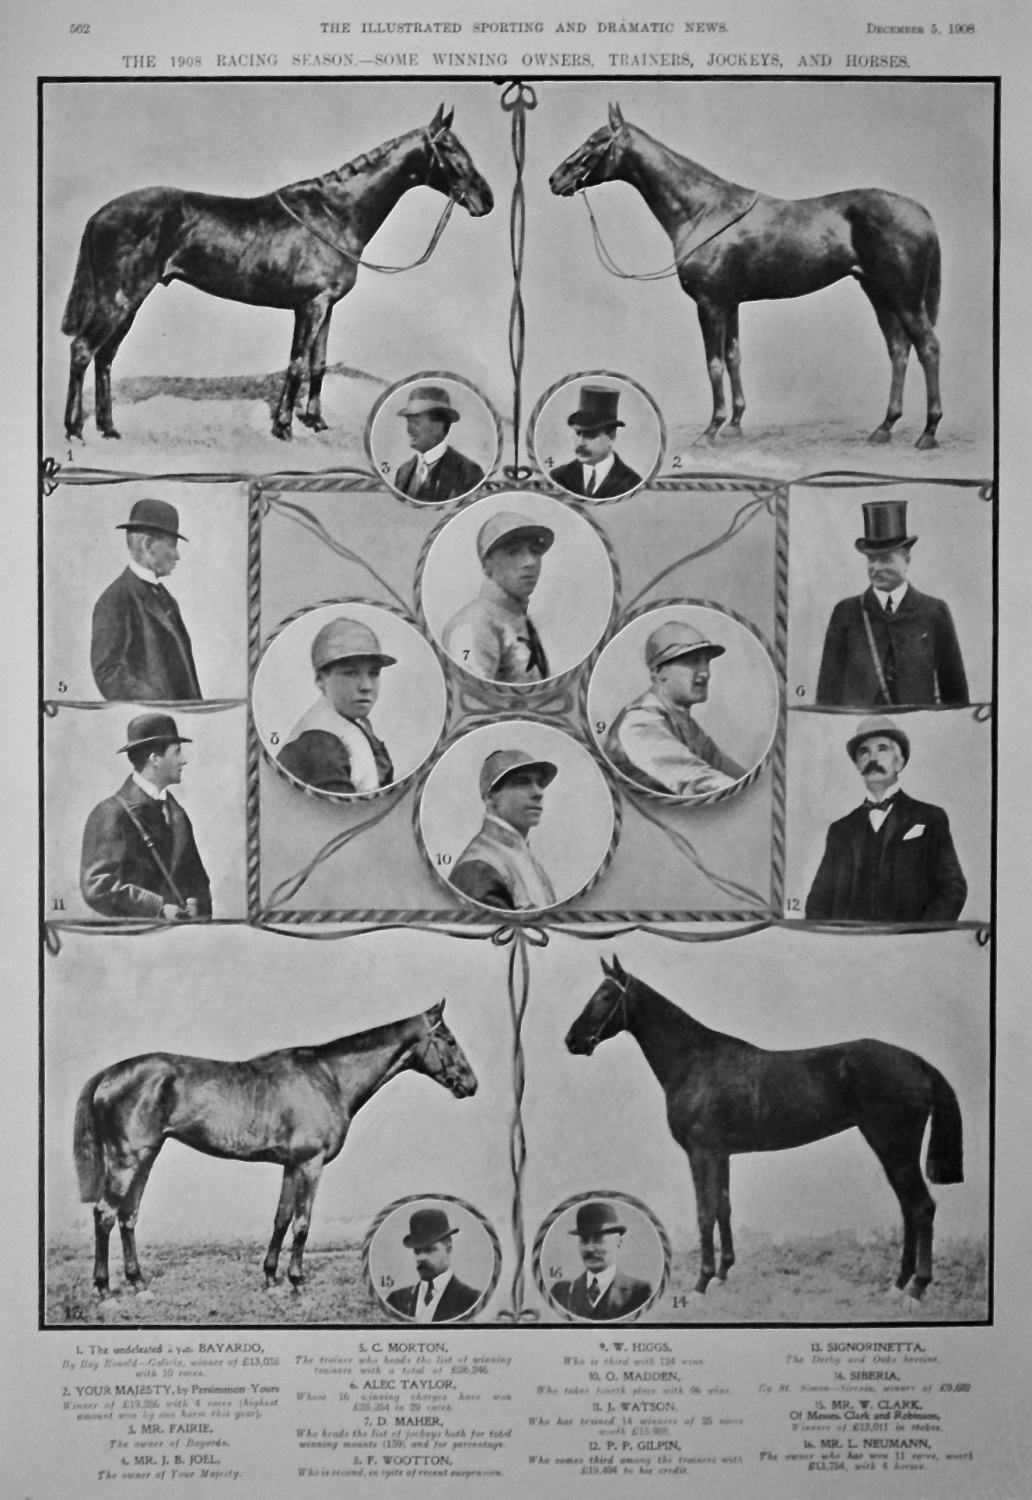 The 1908 Racing Season.- Some Winning Owners, Trainers, Jockeys, and Horses